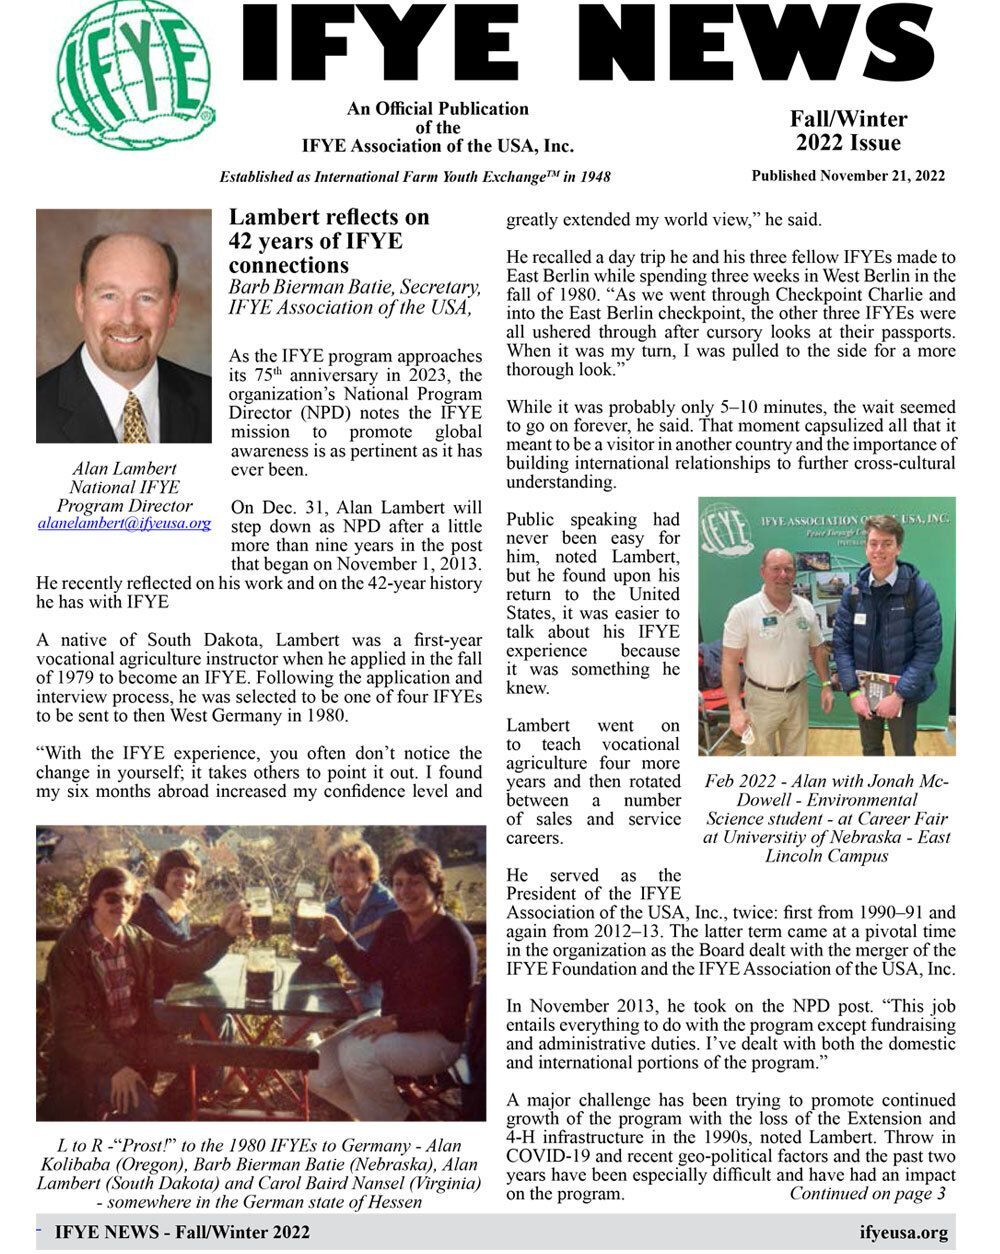 Read the Fall/Winter 2022 Newsletter